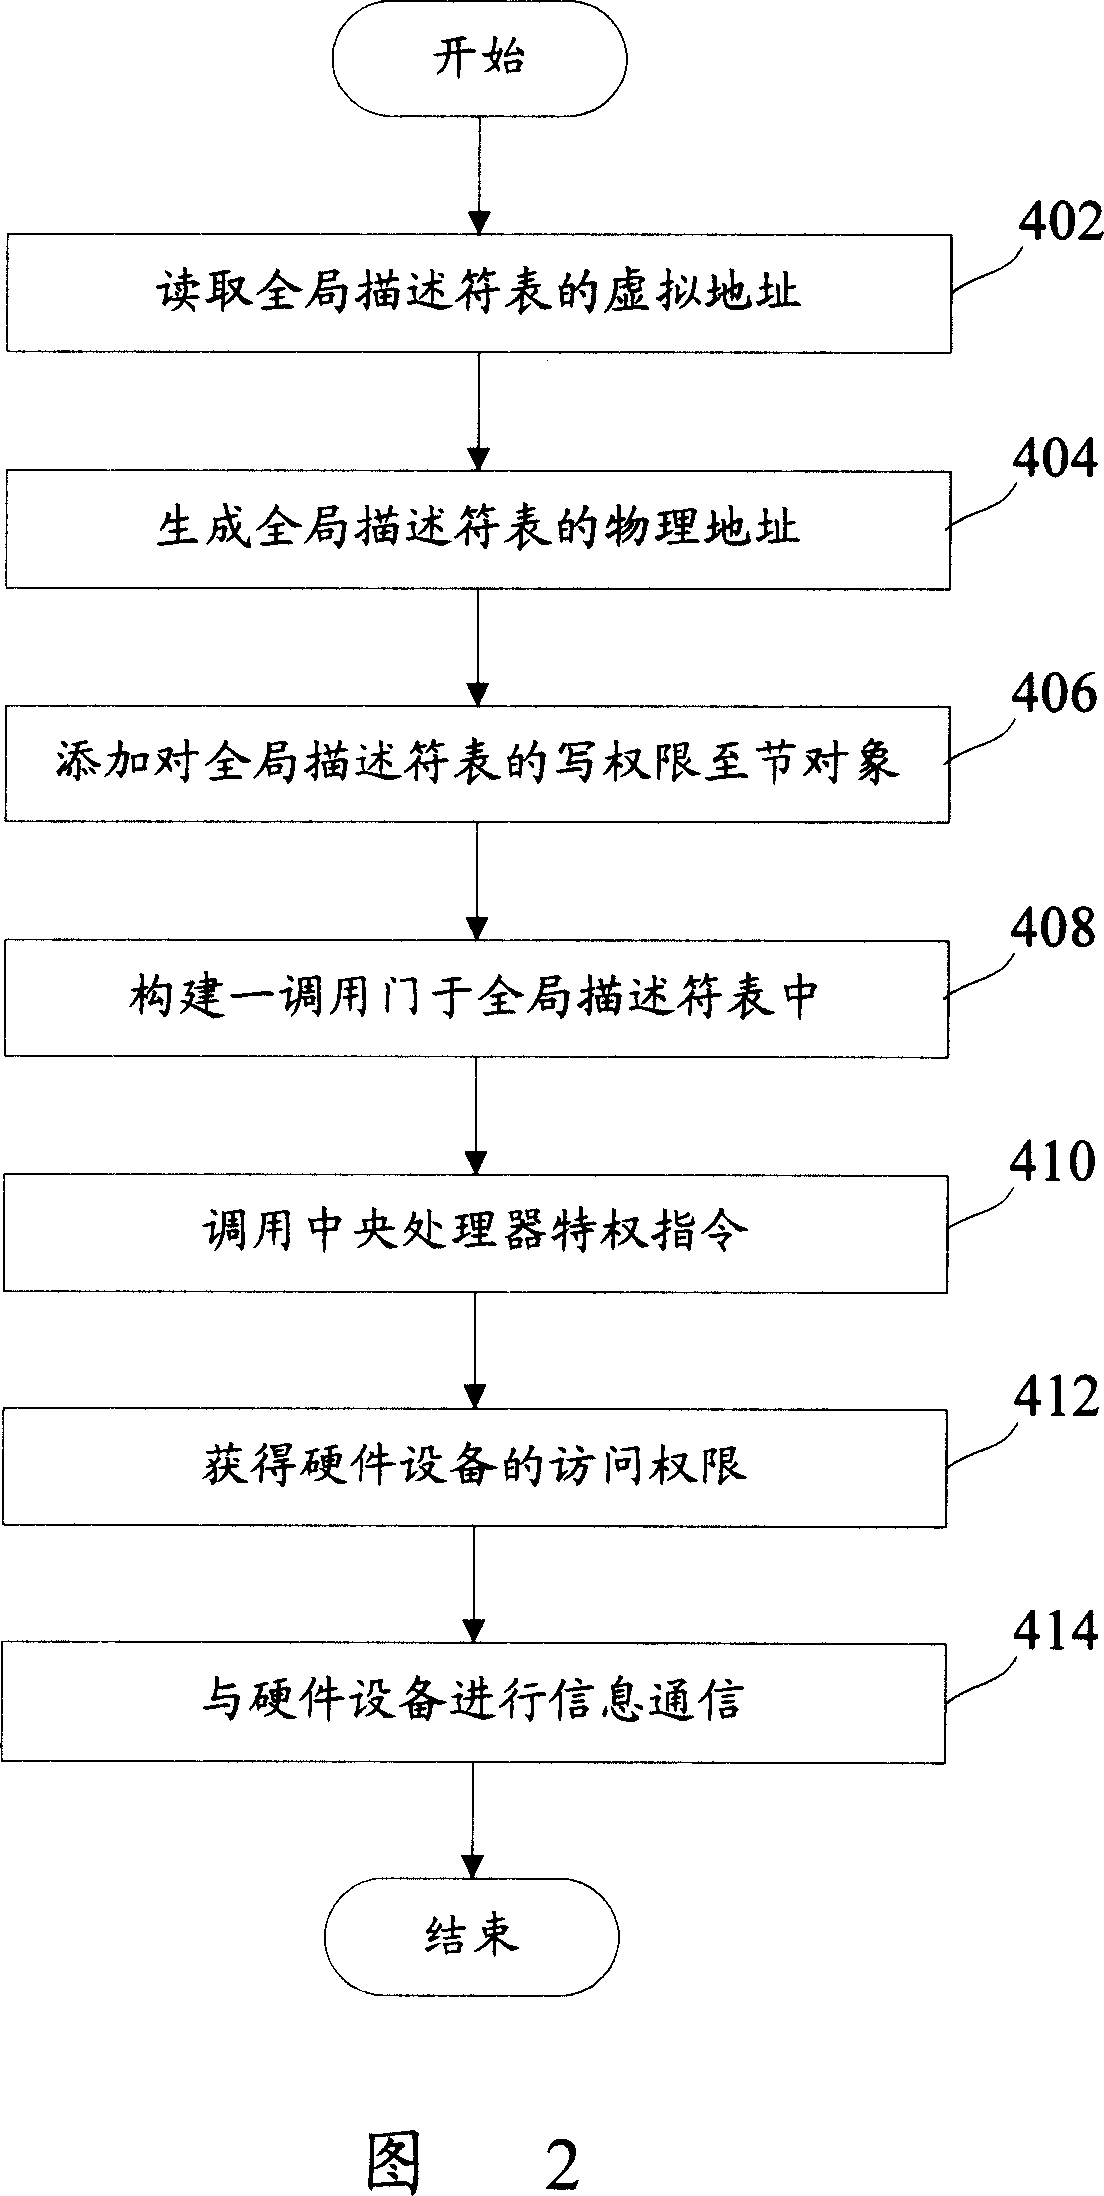 Information interactive system and method